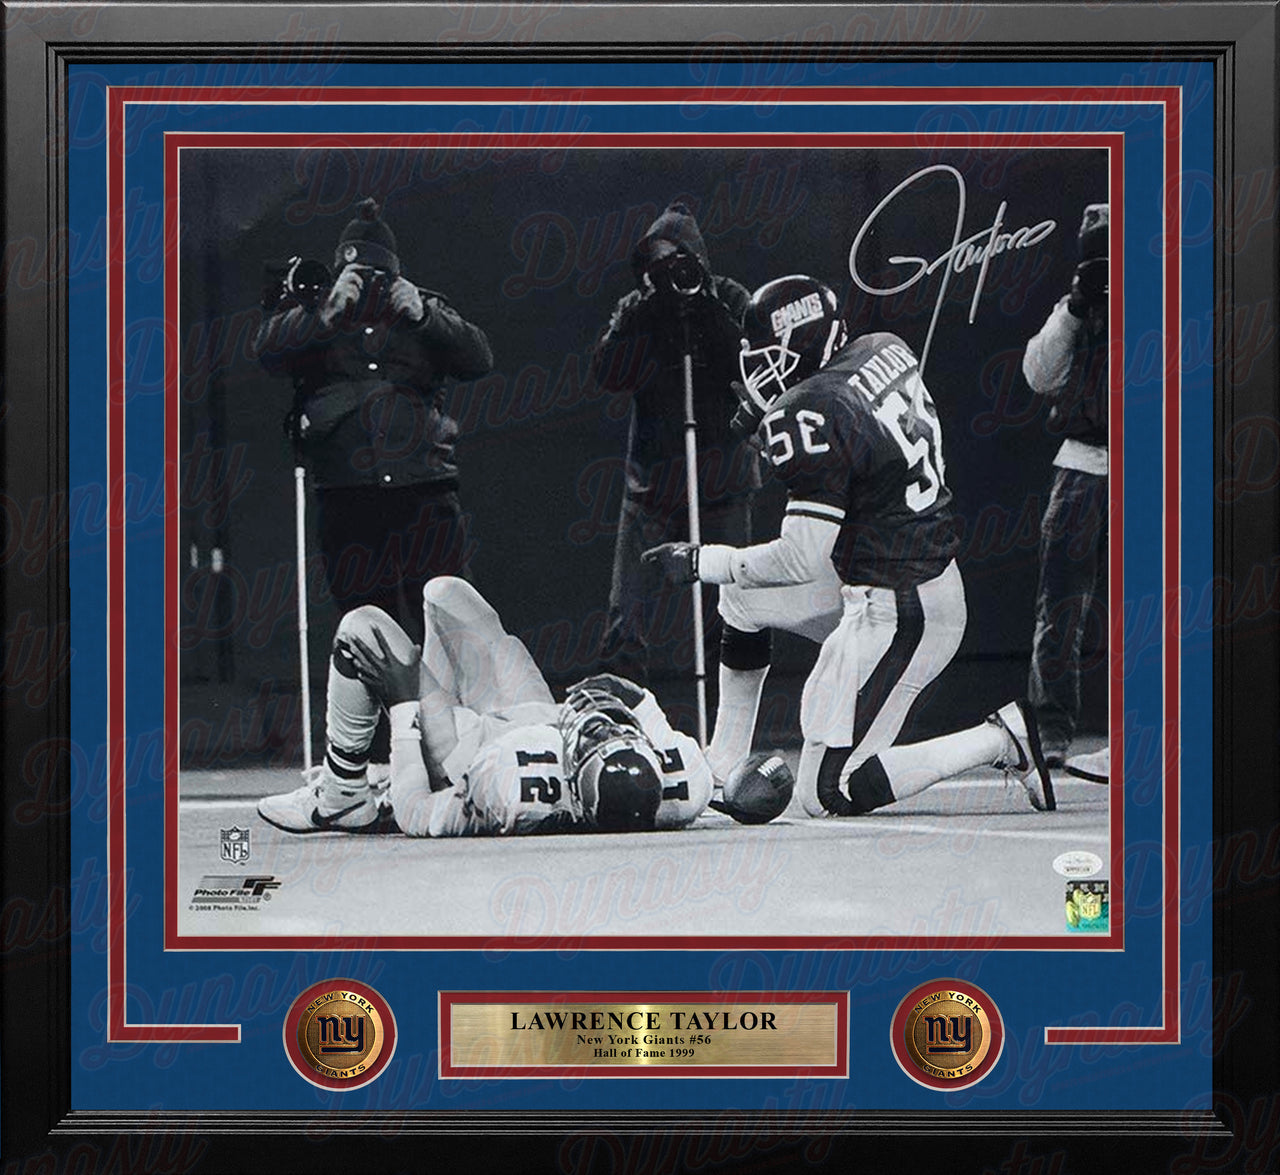 Lawrence Taylor Taunts Randall Cunningham New York Giants Autographed Framed Football Photo - Dynasty Sports & Framing 